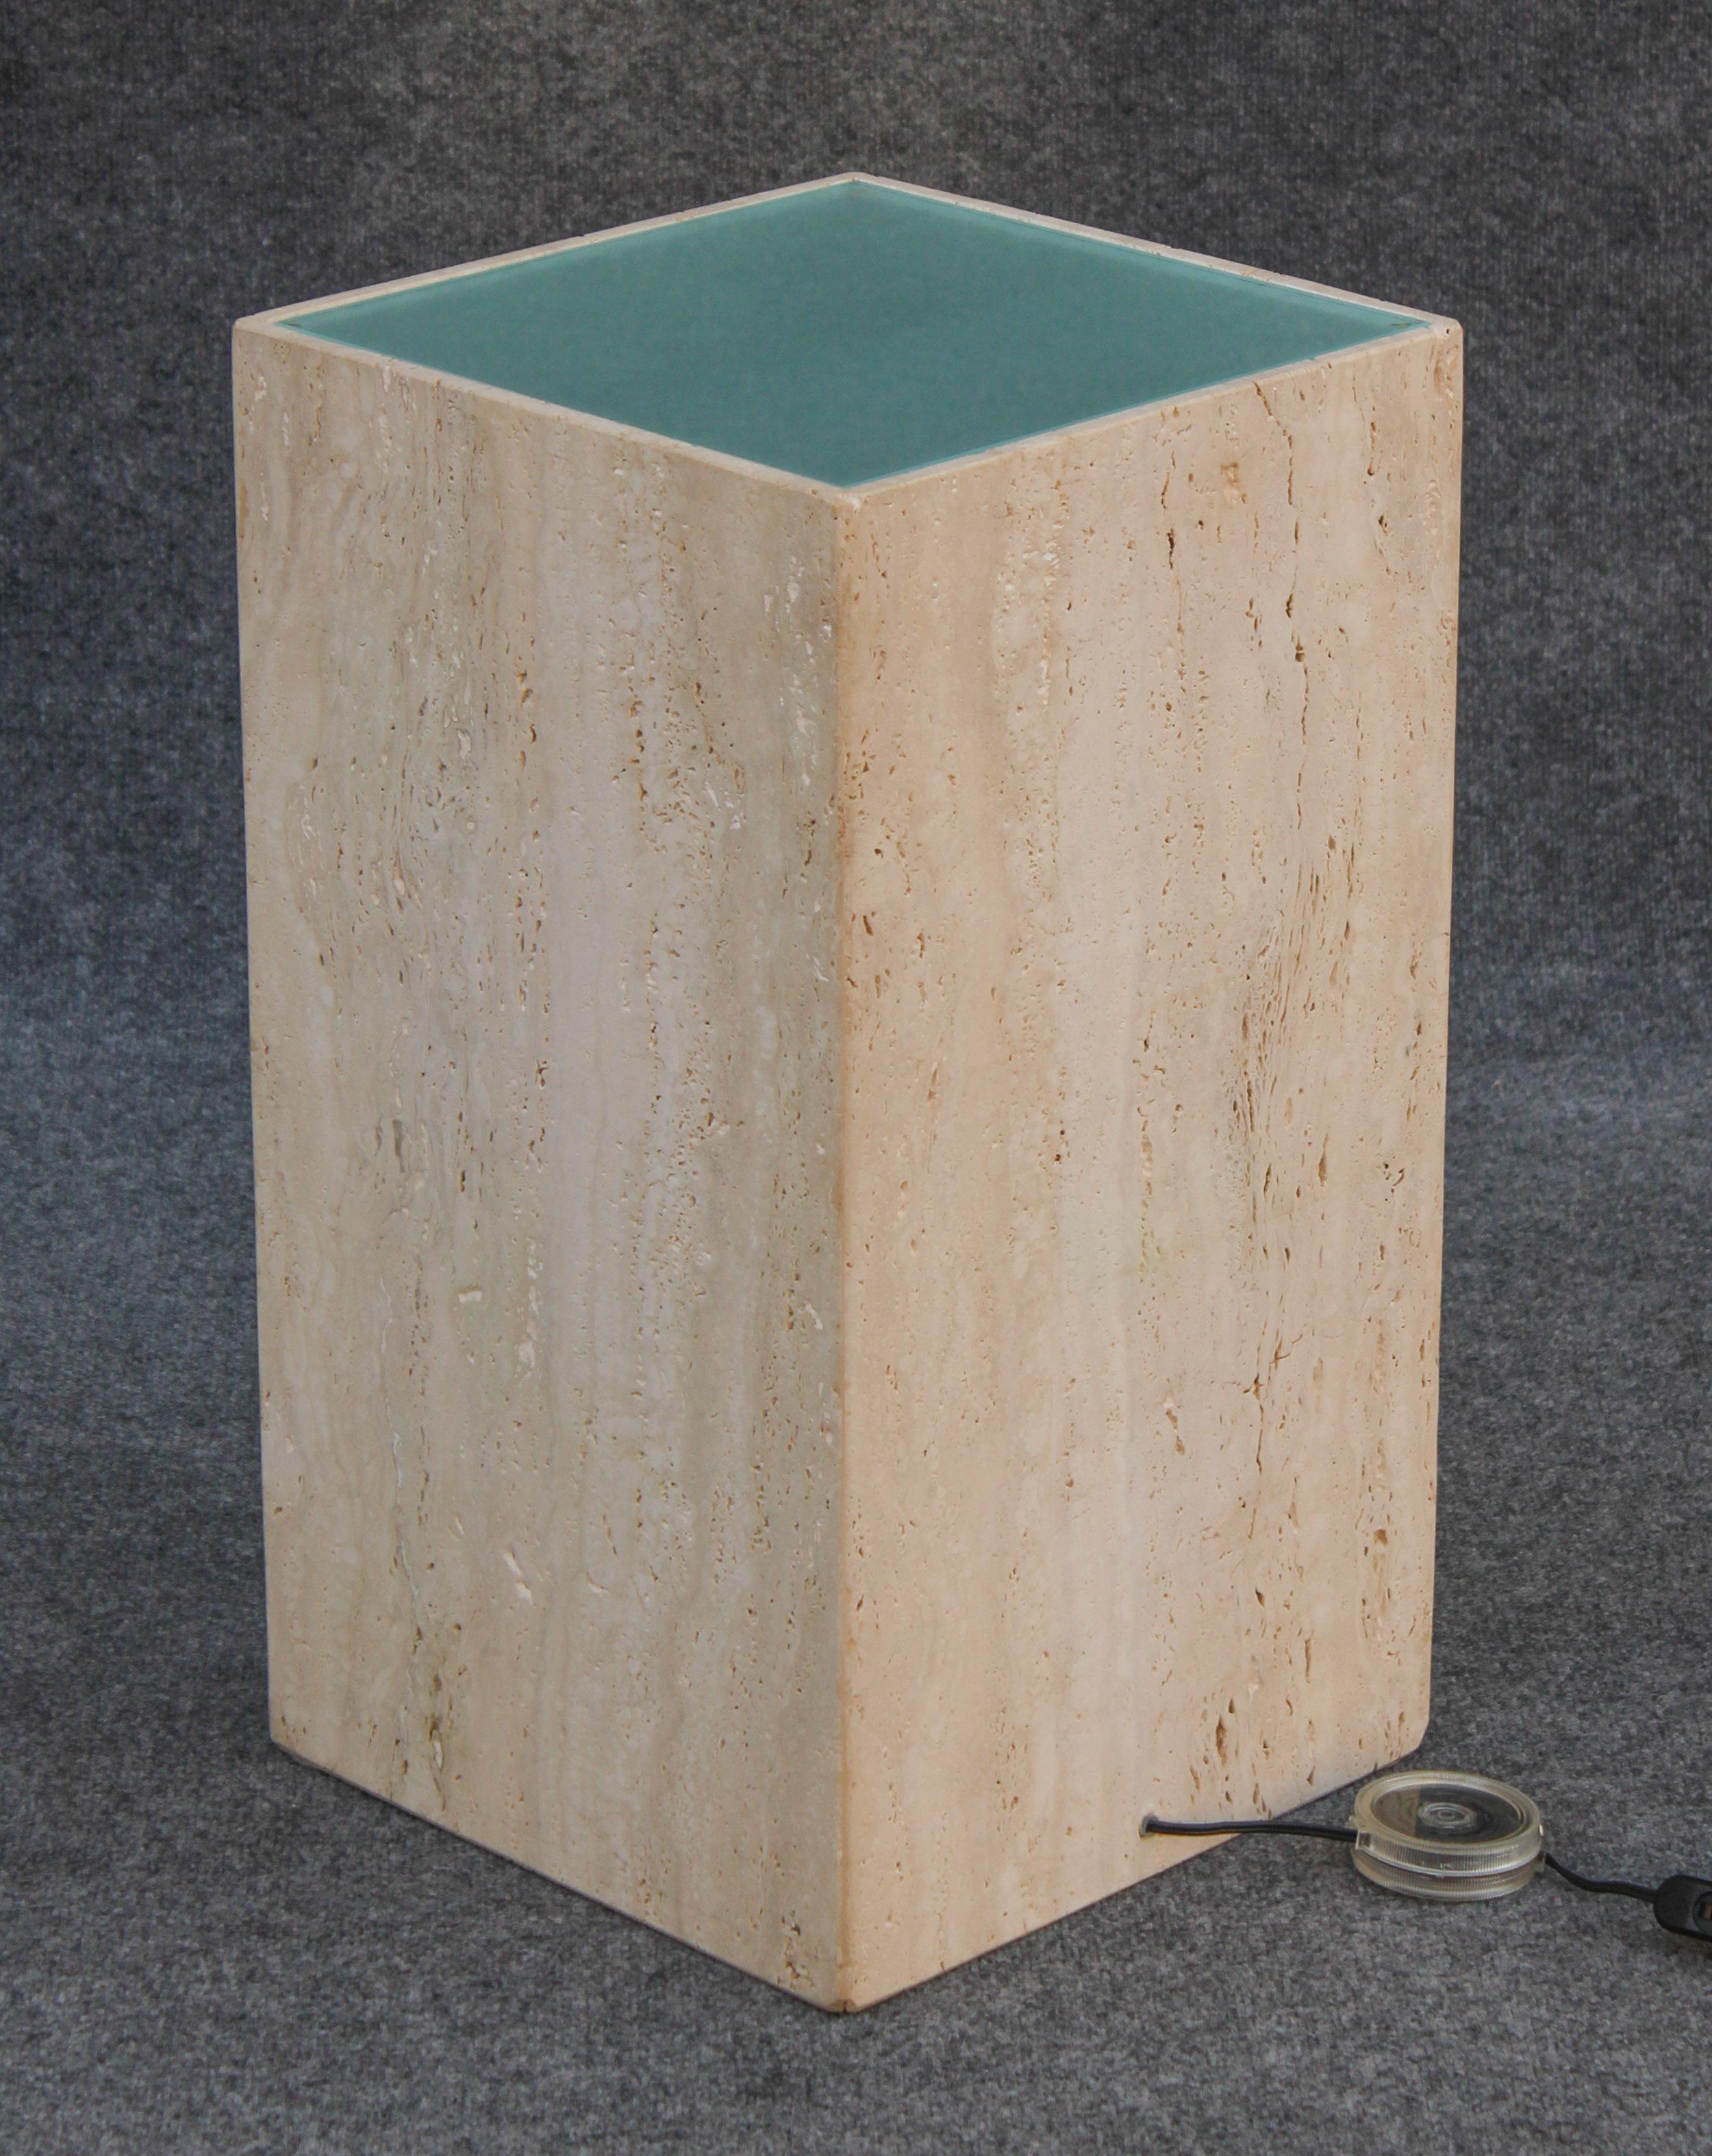 Post-Modern Italian Travertine Marble Frosted Glass Illuminated Pedestal In Good Condition For Sale In Philadelphia, PA